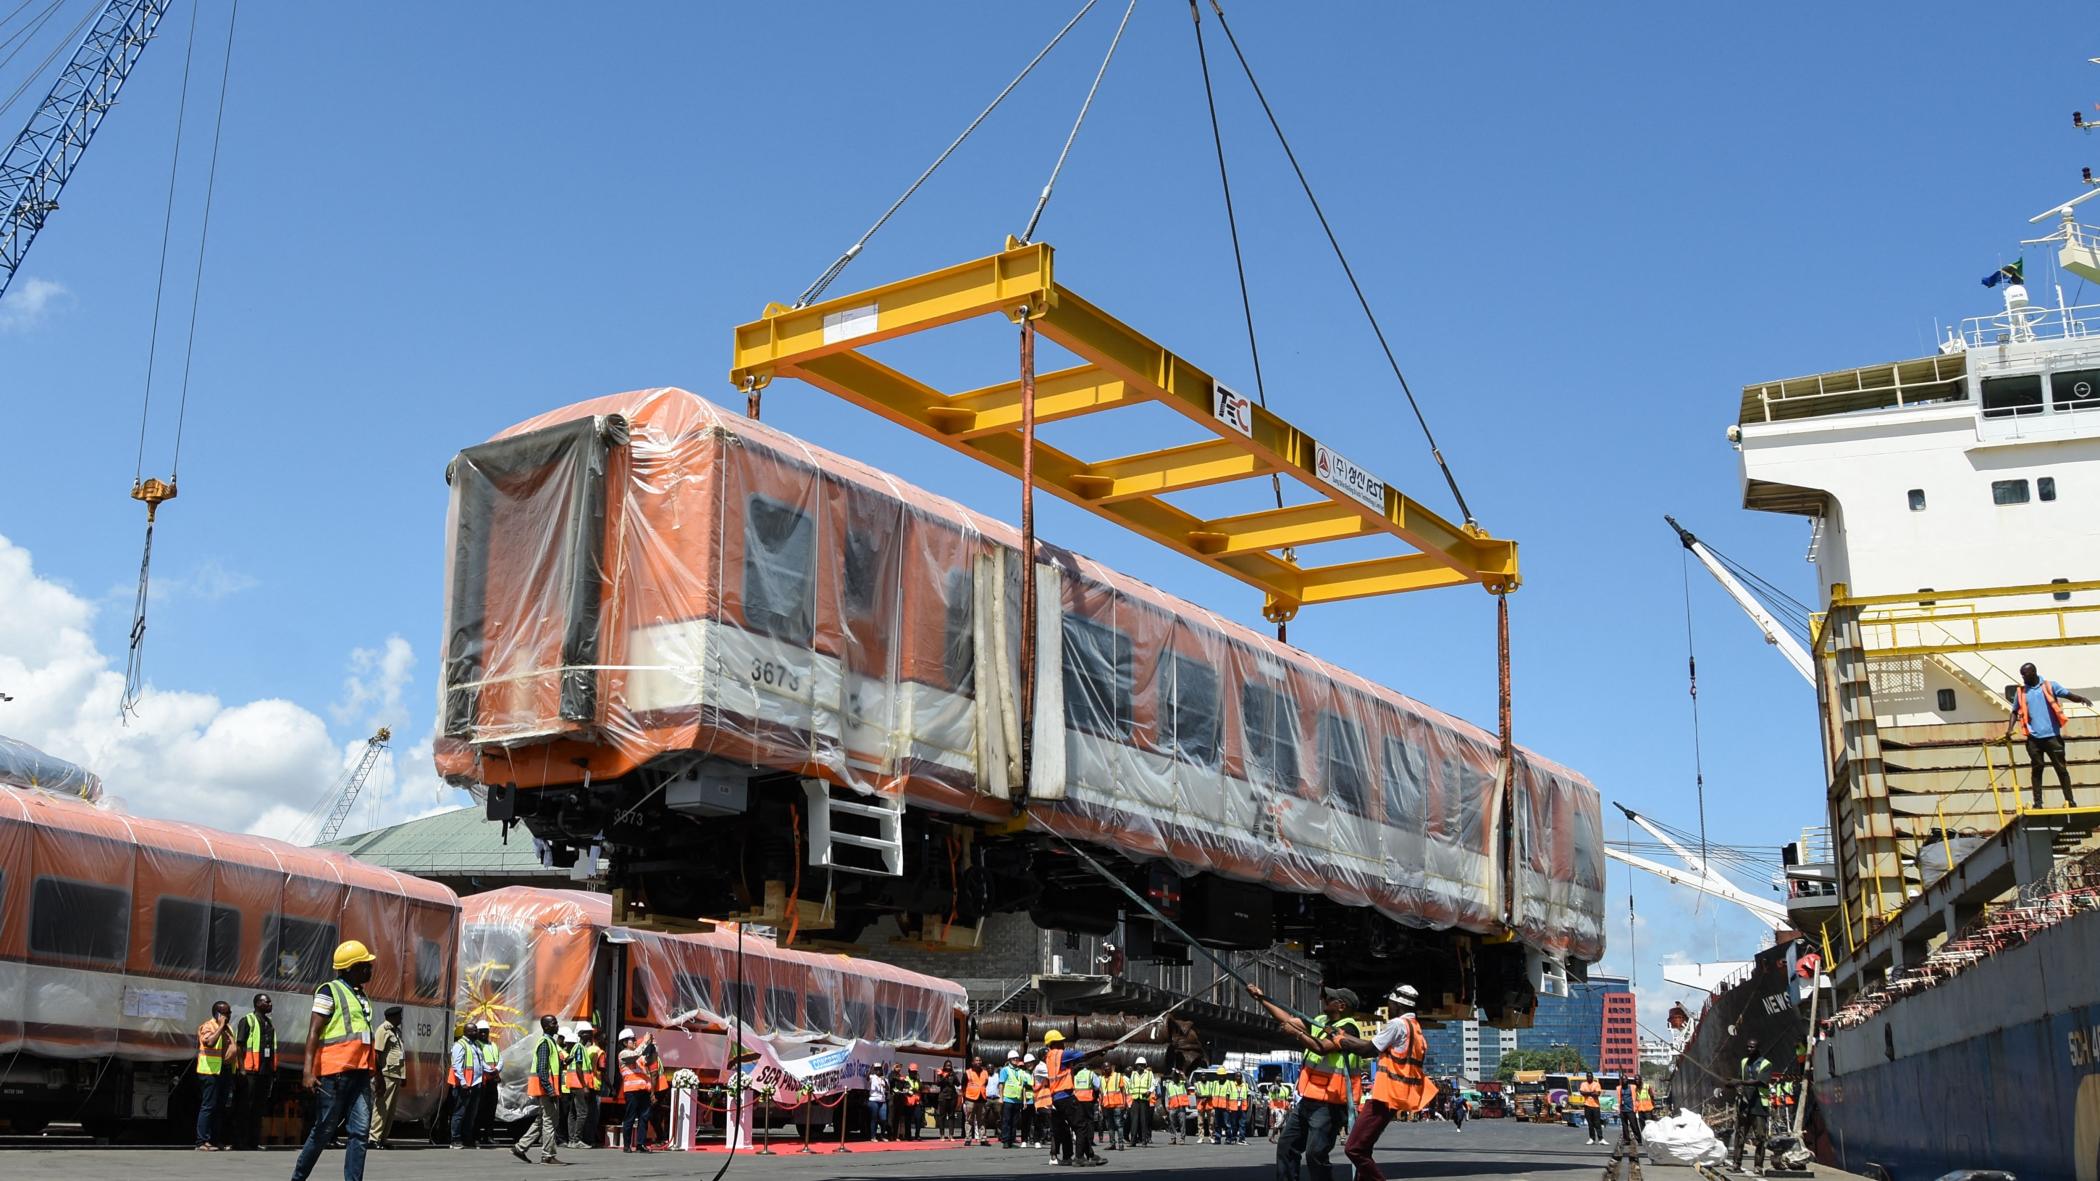 A carriage for the Tanzania's Standard Gauge Railway is unloaded